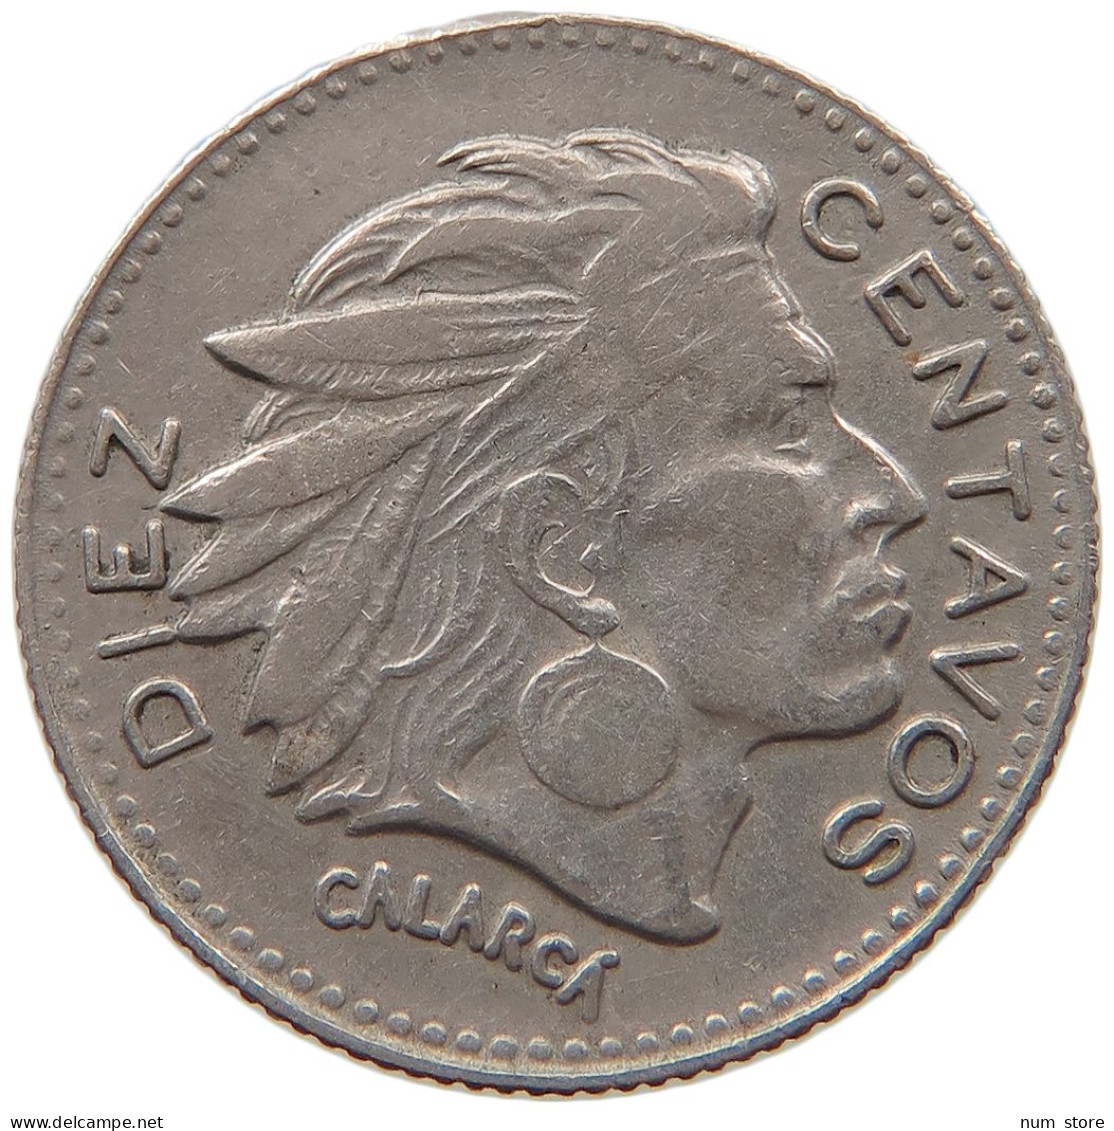 COLOMBIA 10 CENTAVOS 1956  #MA 067211 - Colombia